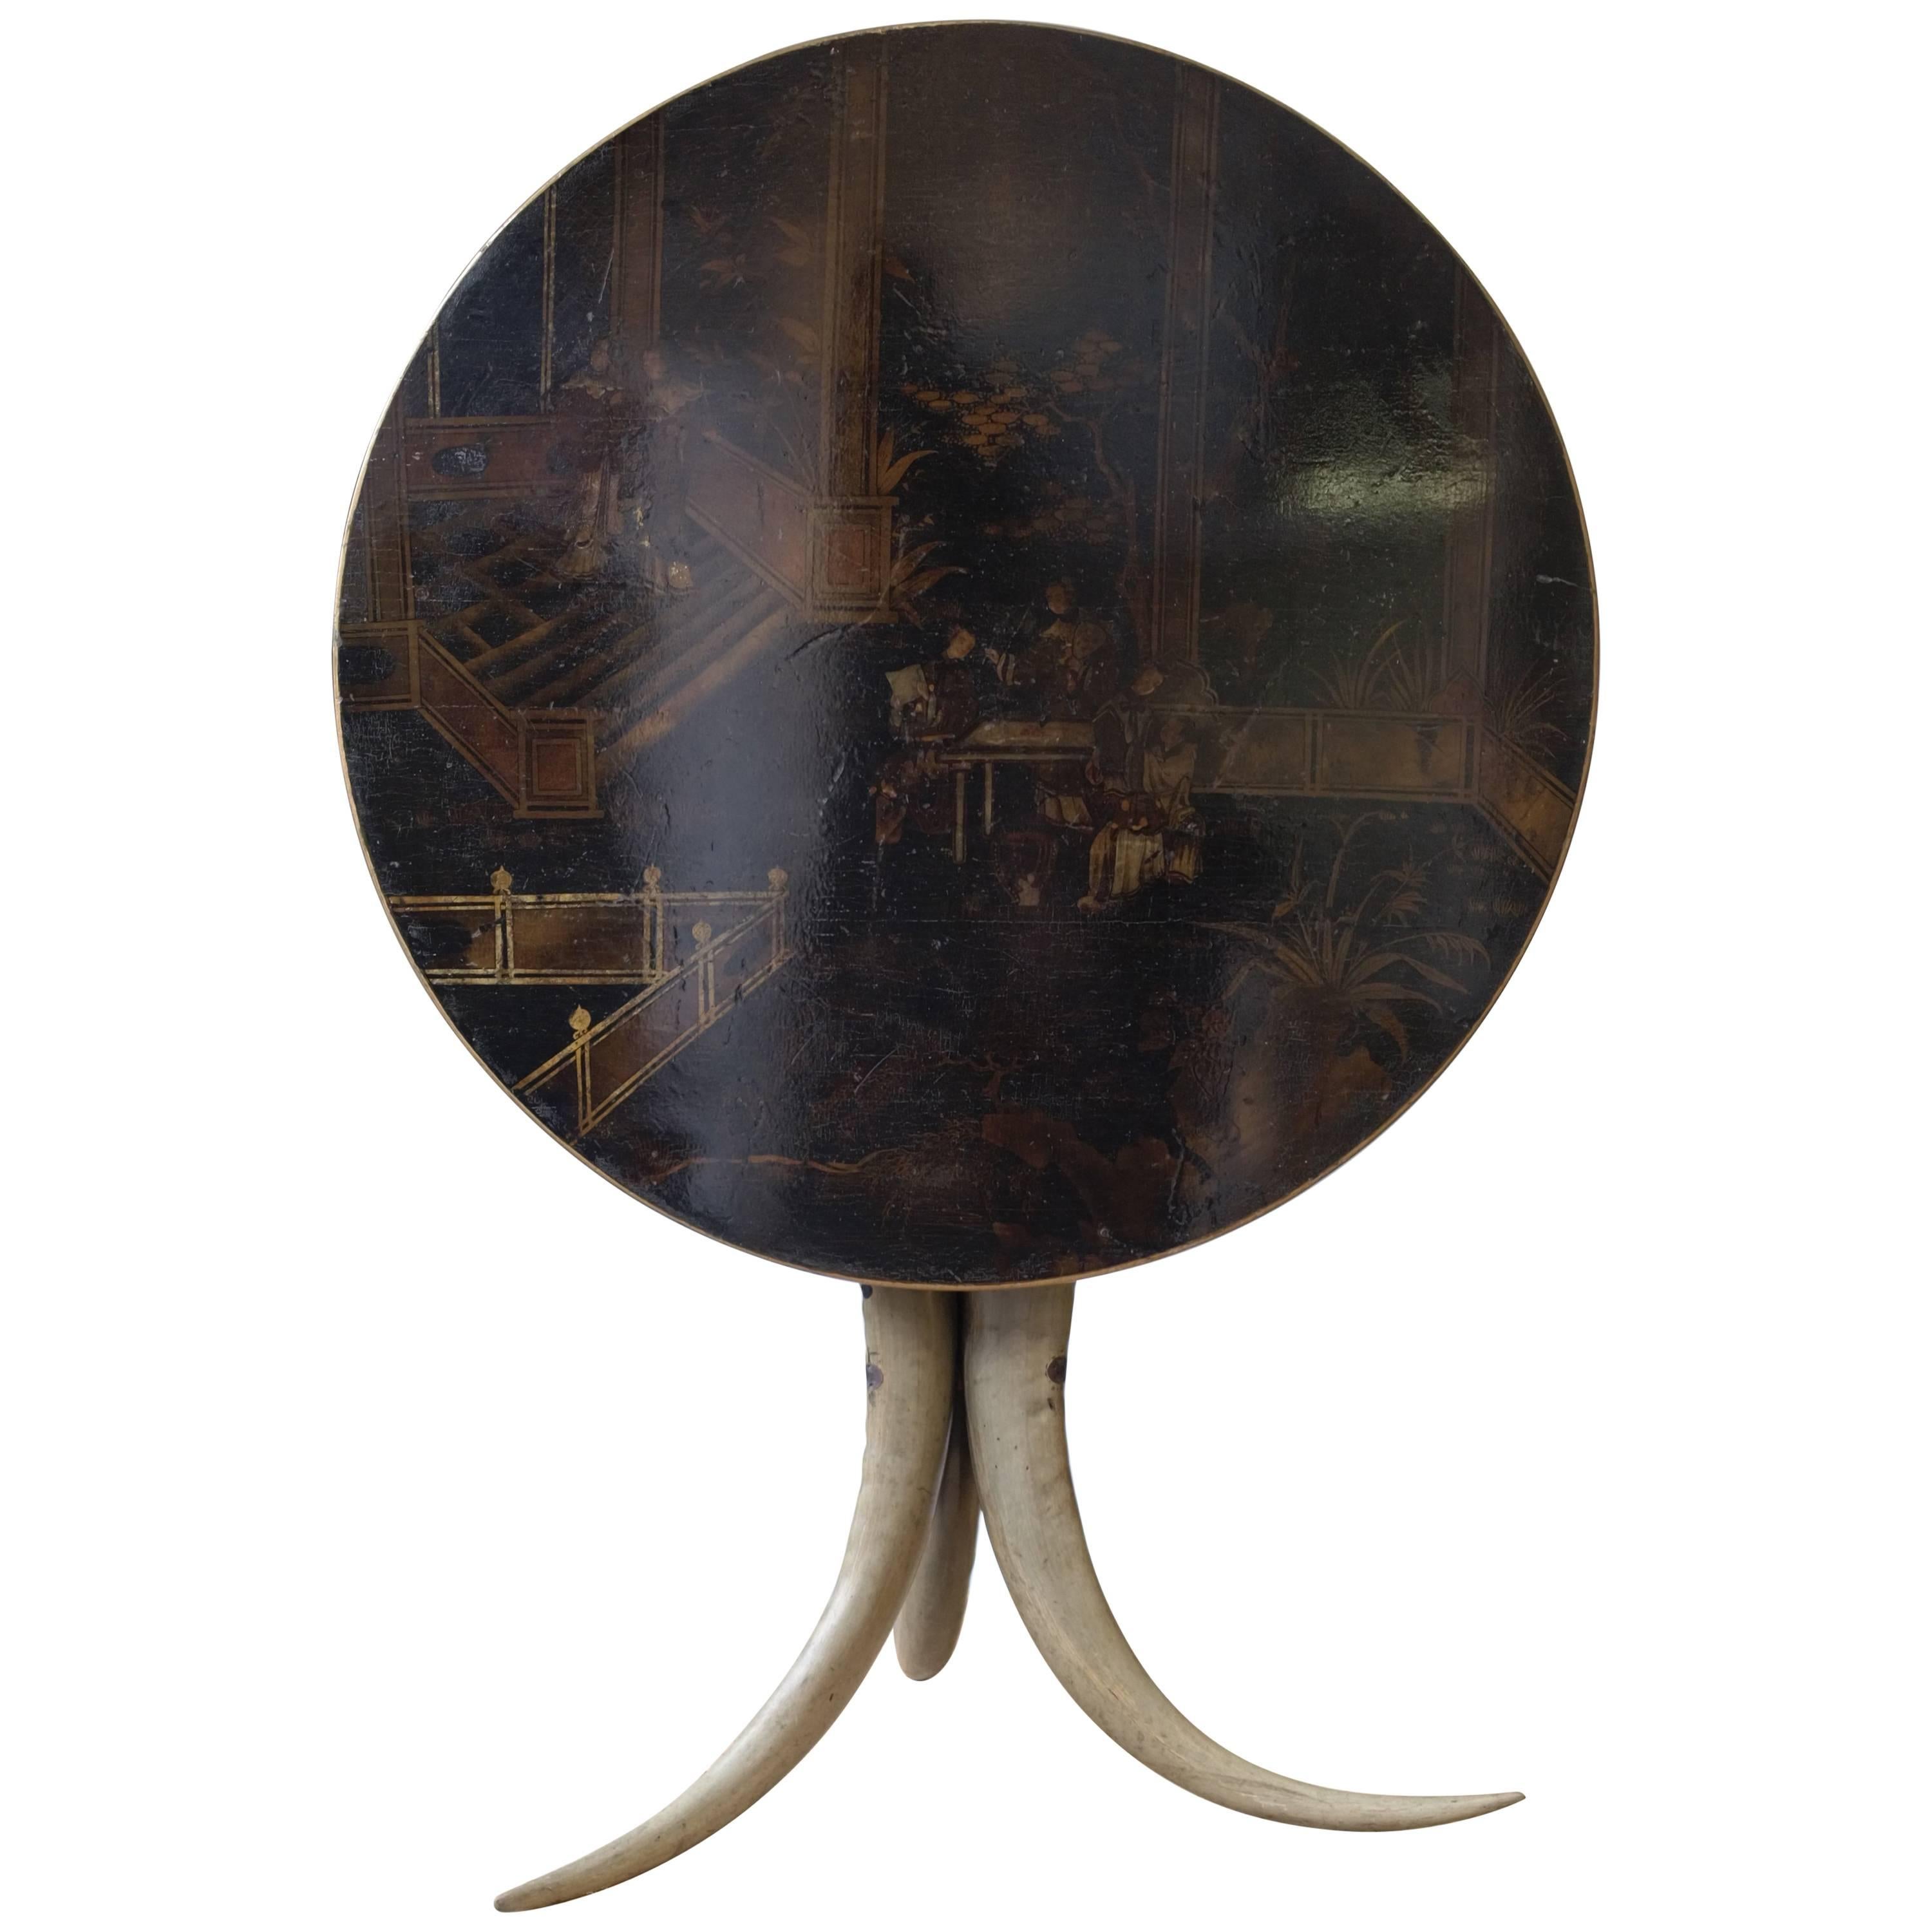 Napoleon III Tripod Table, Chinese Lacquered Decor Tilting Tray and Horn Feet